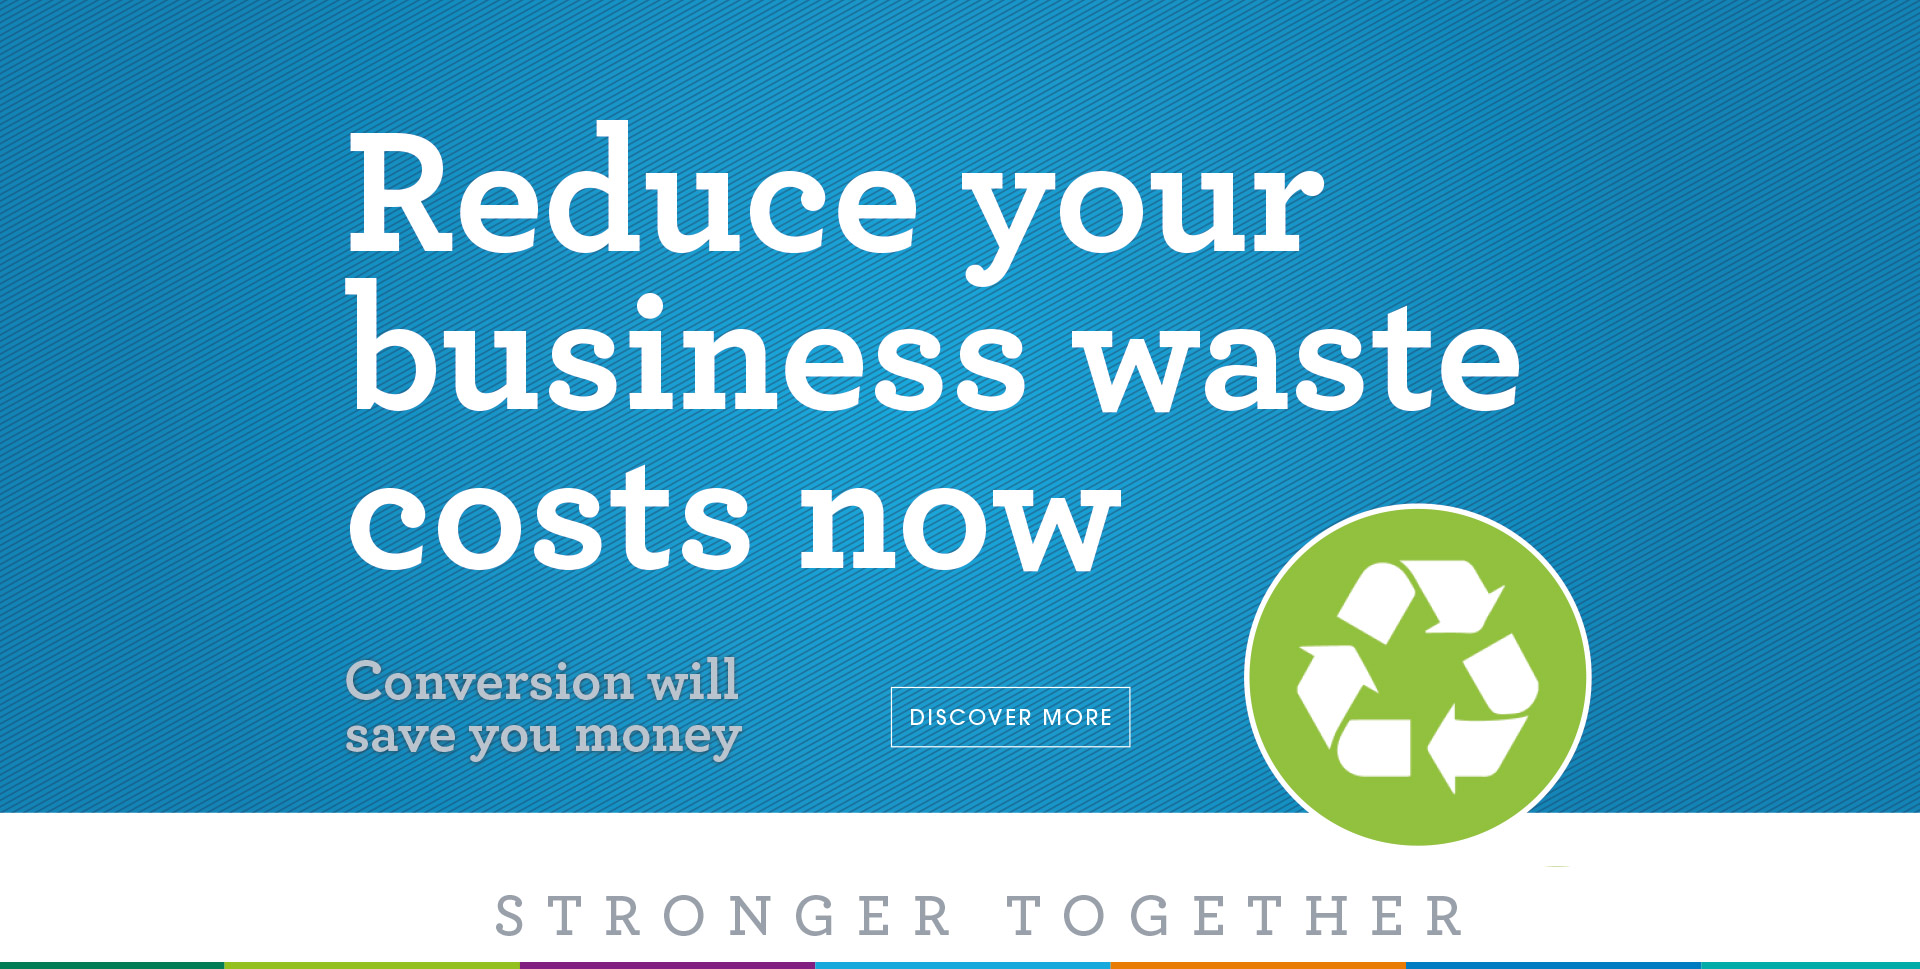 Reduce your business waste costs now